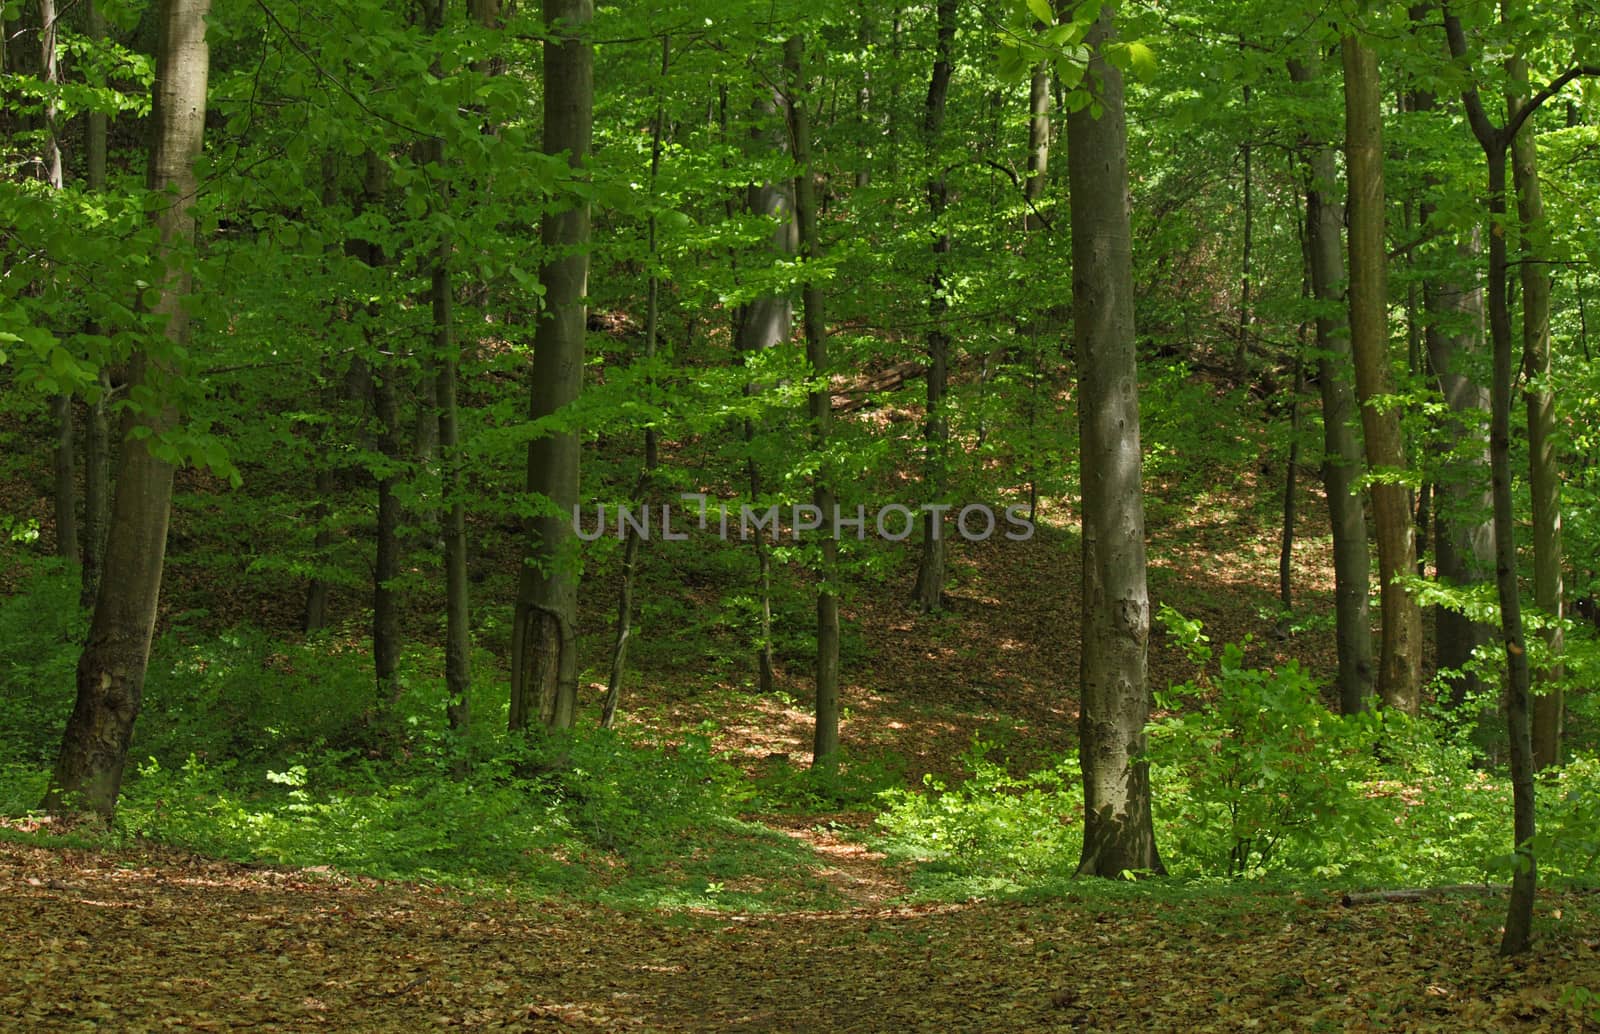 deciduous forest with European Beech trees